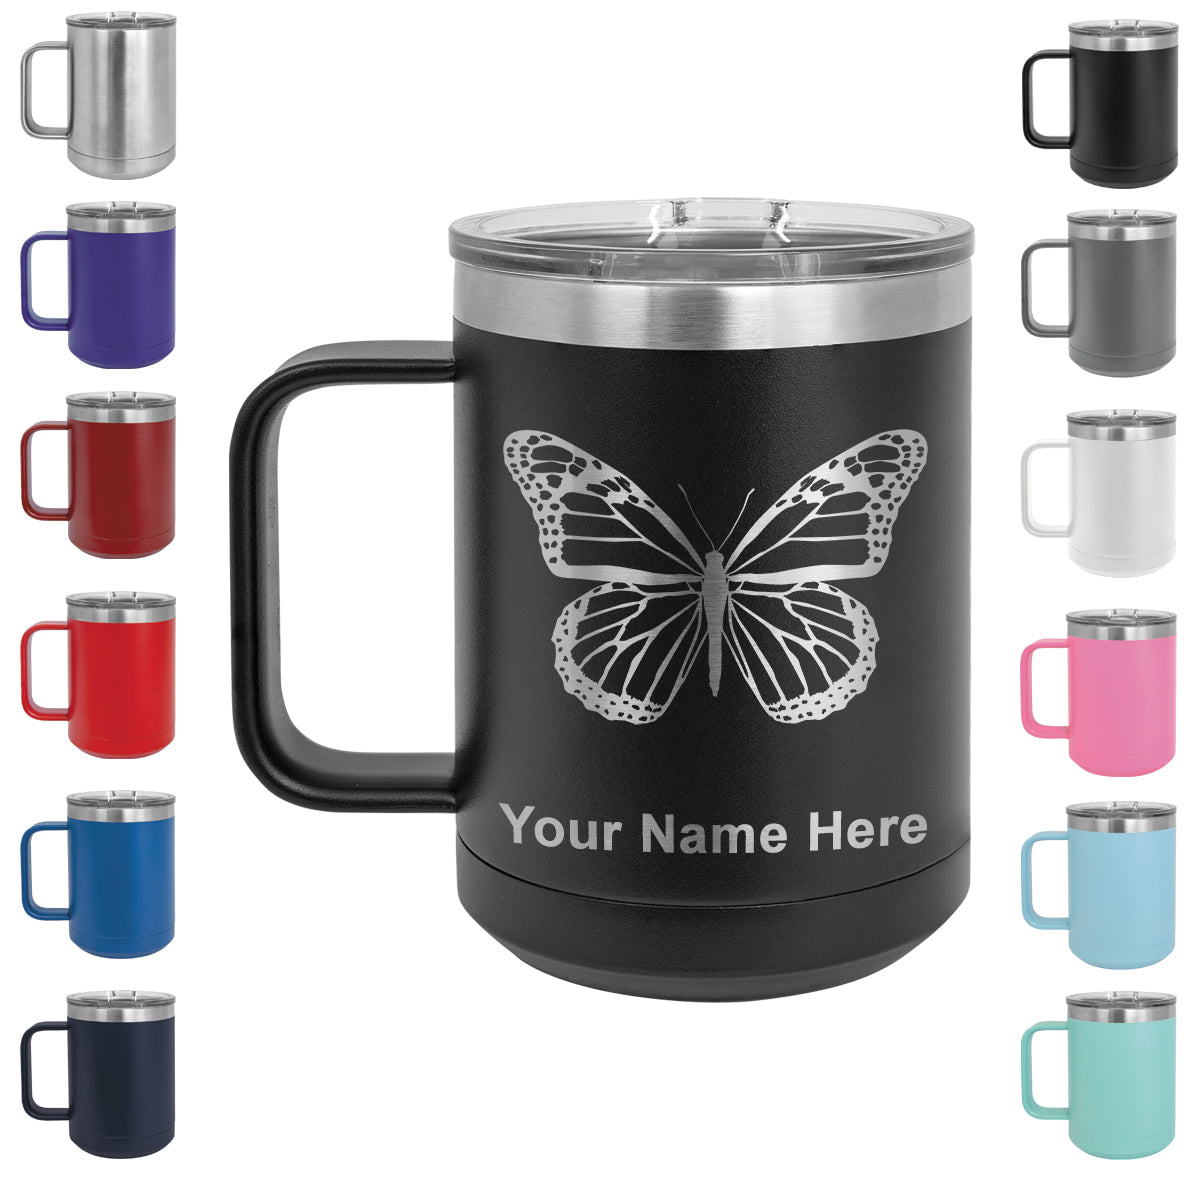 15oz Vacuum Insulated Coffee Mug, Monarch Butterfly, Personalized Engraving Included